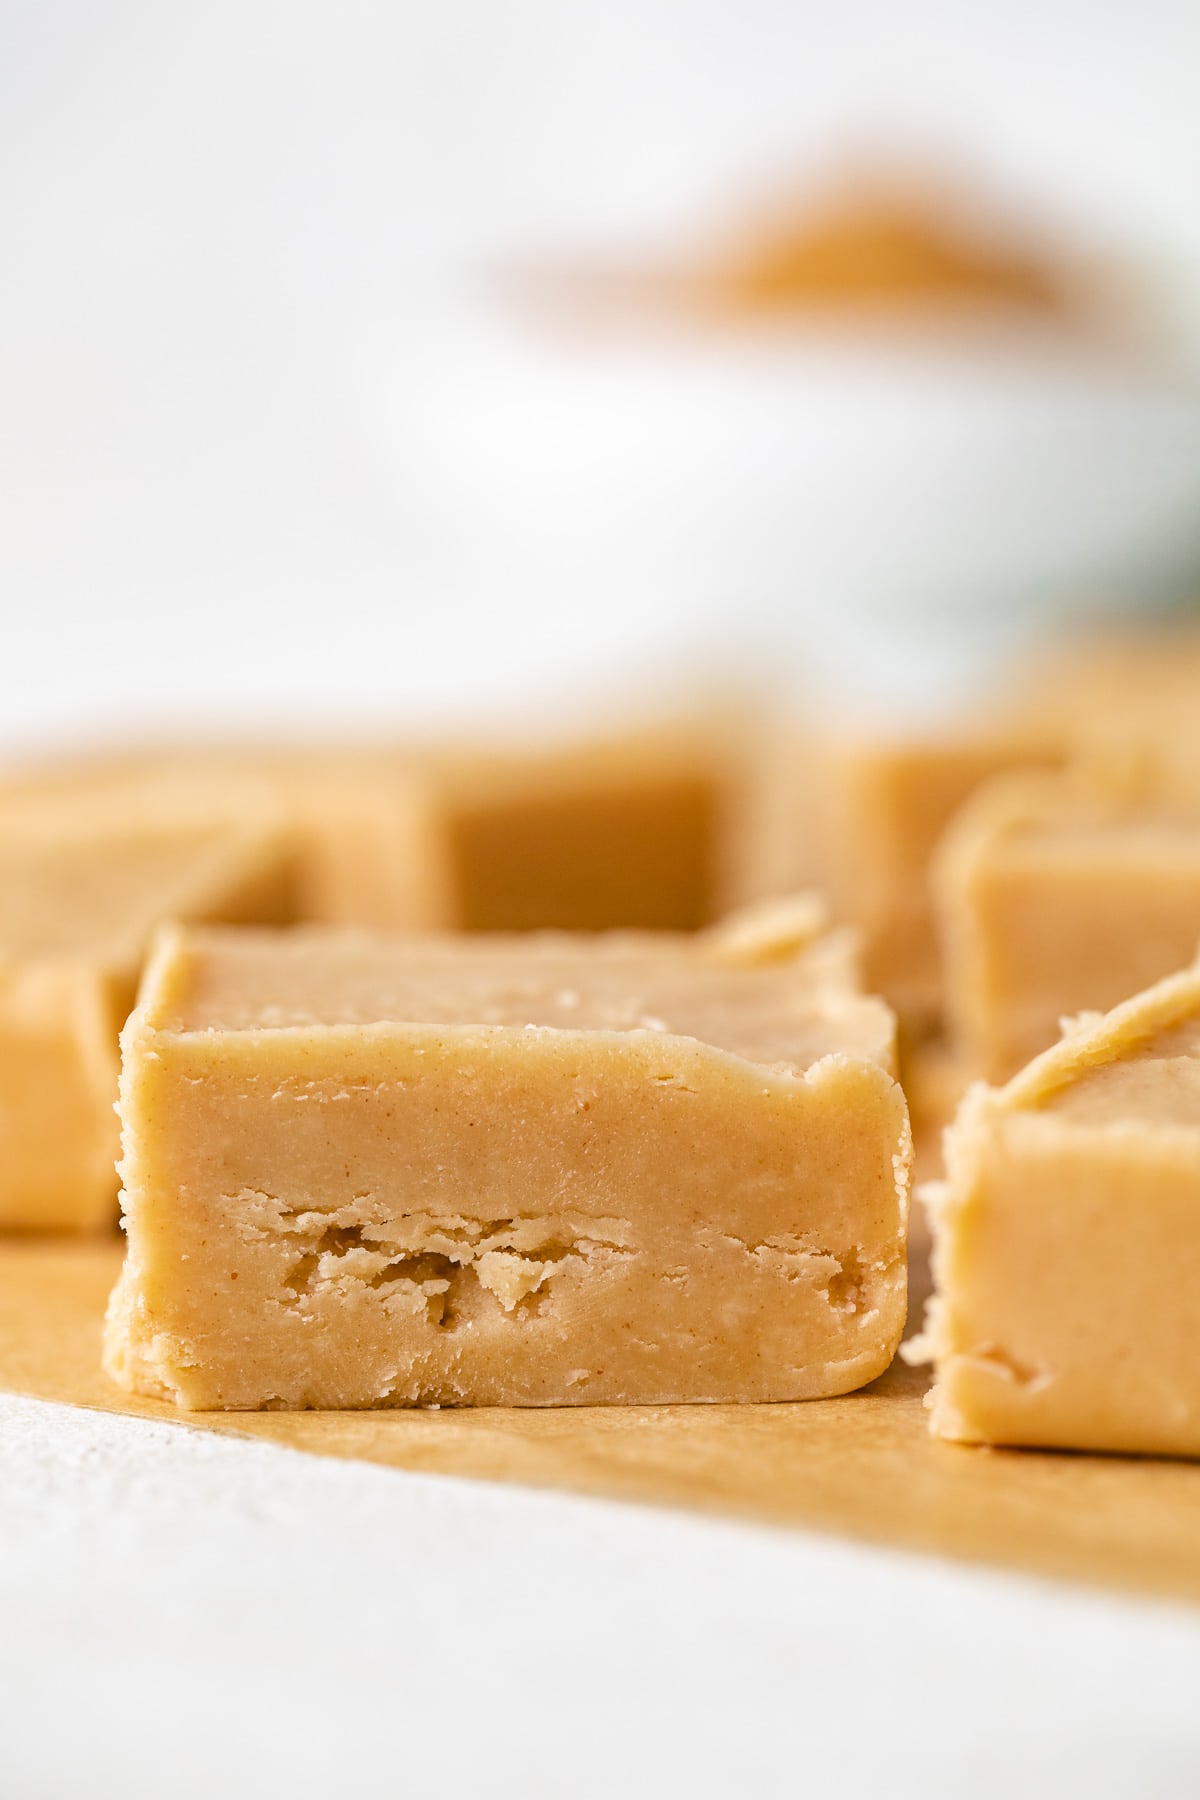 Squares of peanut butter candy on parchment.